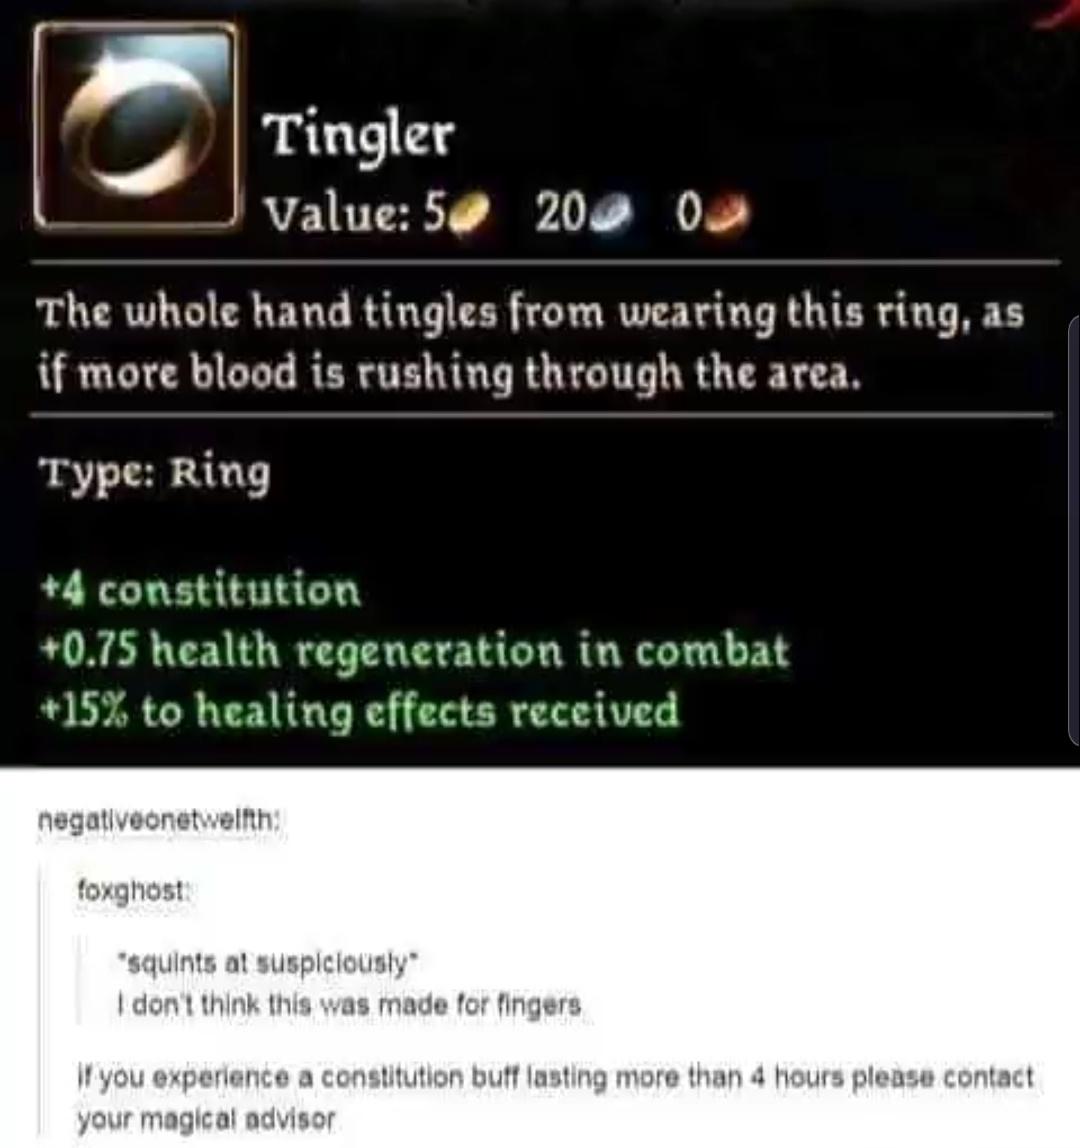 funny gaming memes  - dragon age inquisition memes reddit - Tingler Value 5@ 2000 The whole hand tingles from wearing this ring, as if more blood is rushing through the area. Type Ring 4 constitution 0.75 health regeneration in combat 15% to healing effec